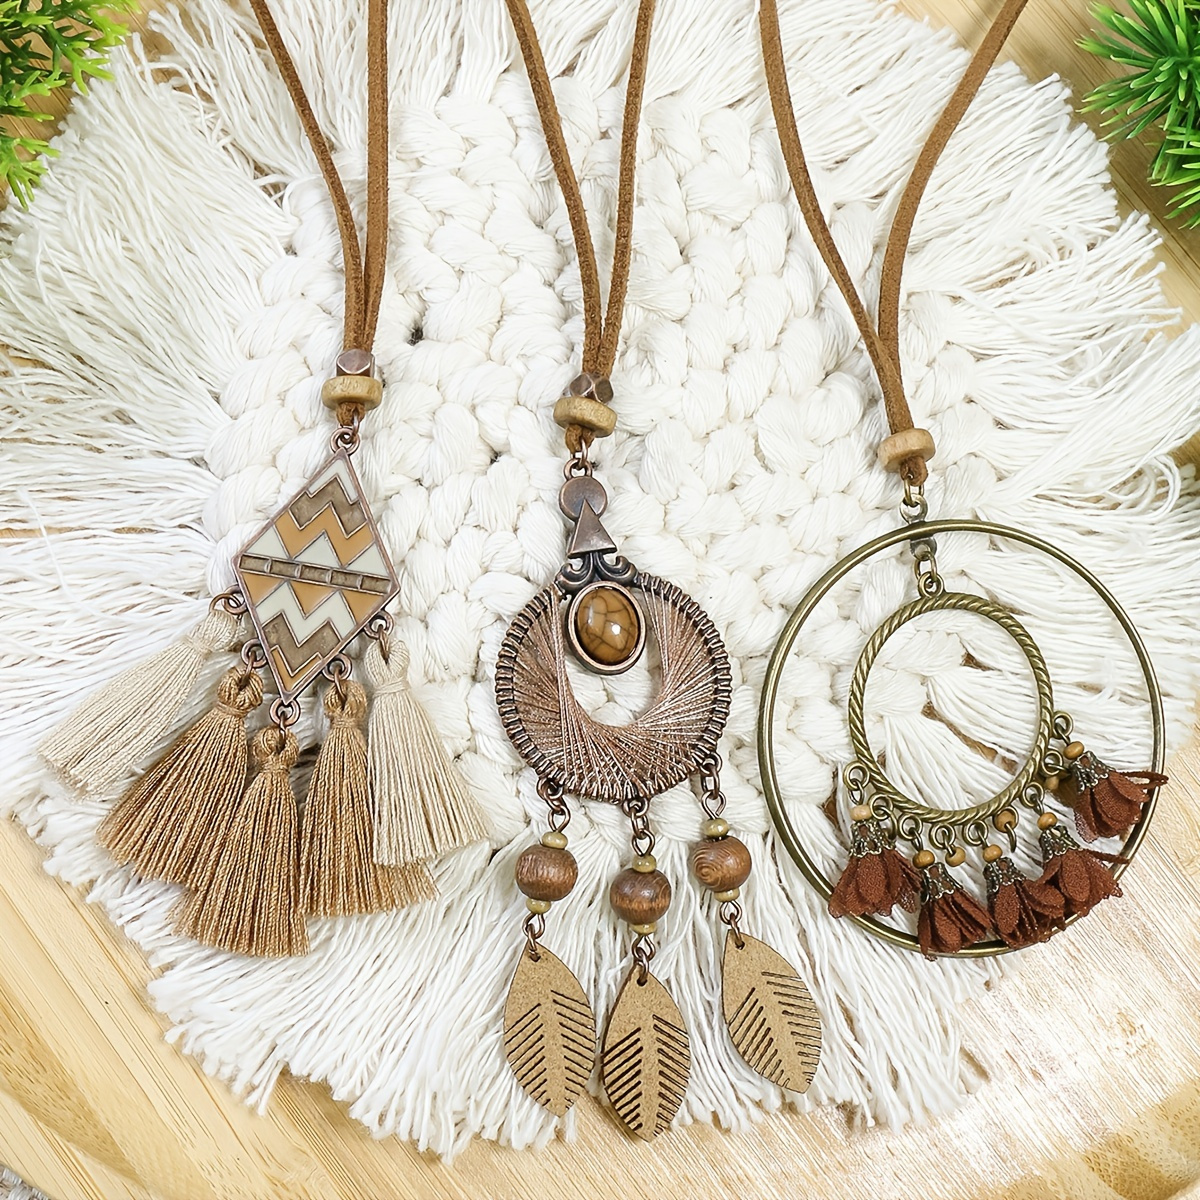 Jewelry Of The Week – Earthy/Bohemian Bracelet and Necklace Set